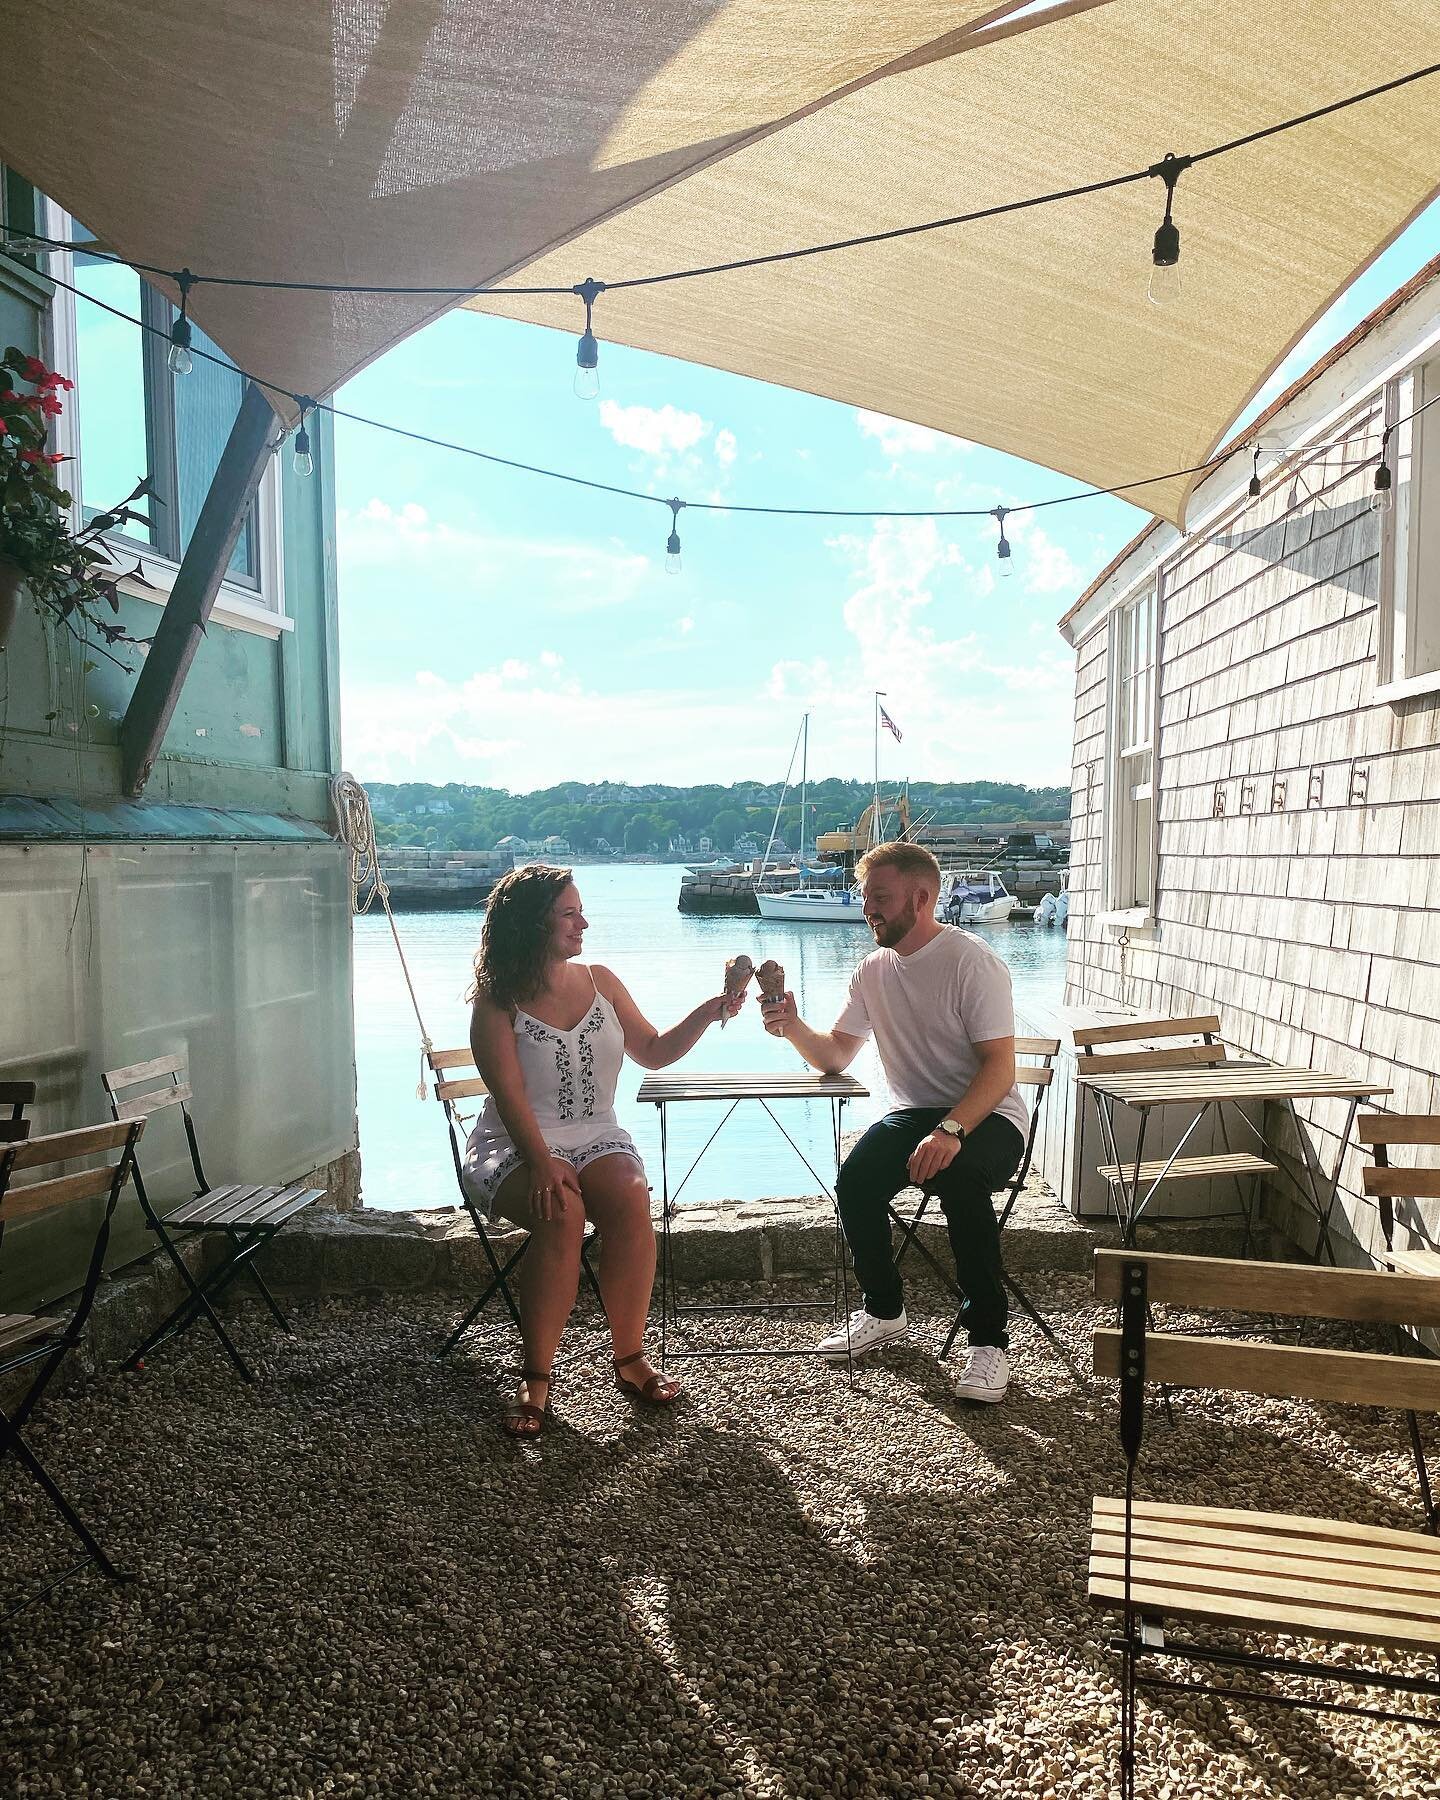 Happy engagement to this lovely couple! Nothing says happiness quite like an ice cream on a beautiful day to celebrate your new journey together 😊❤️